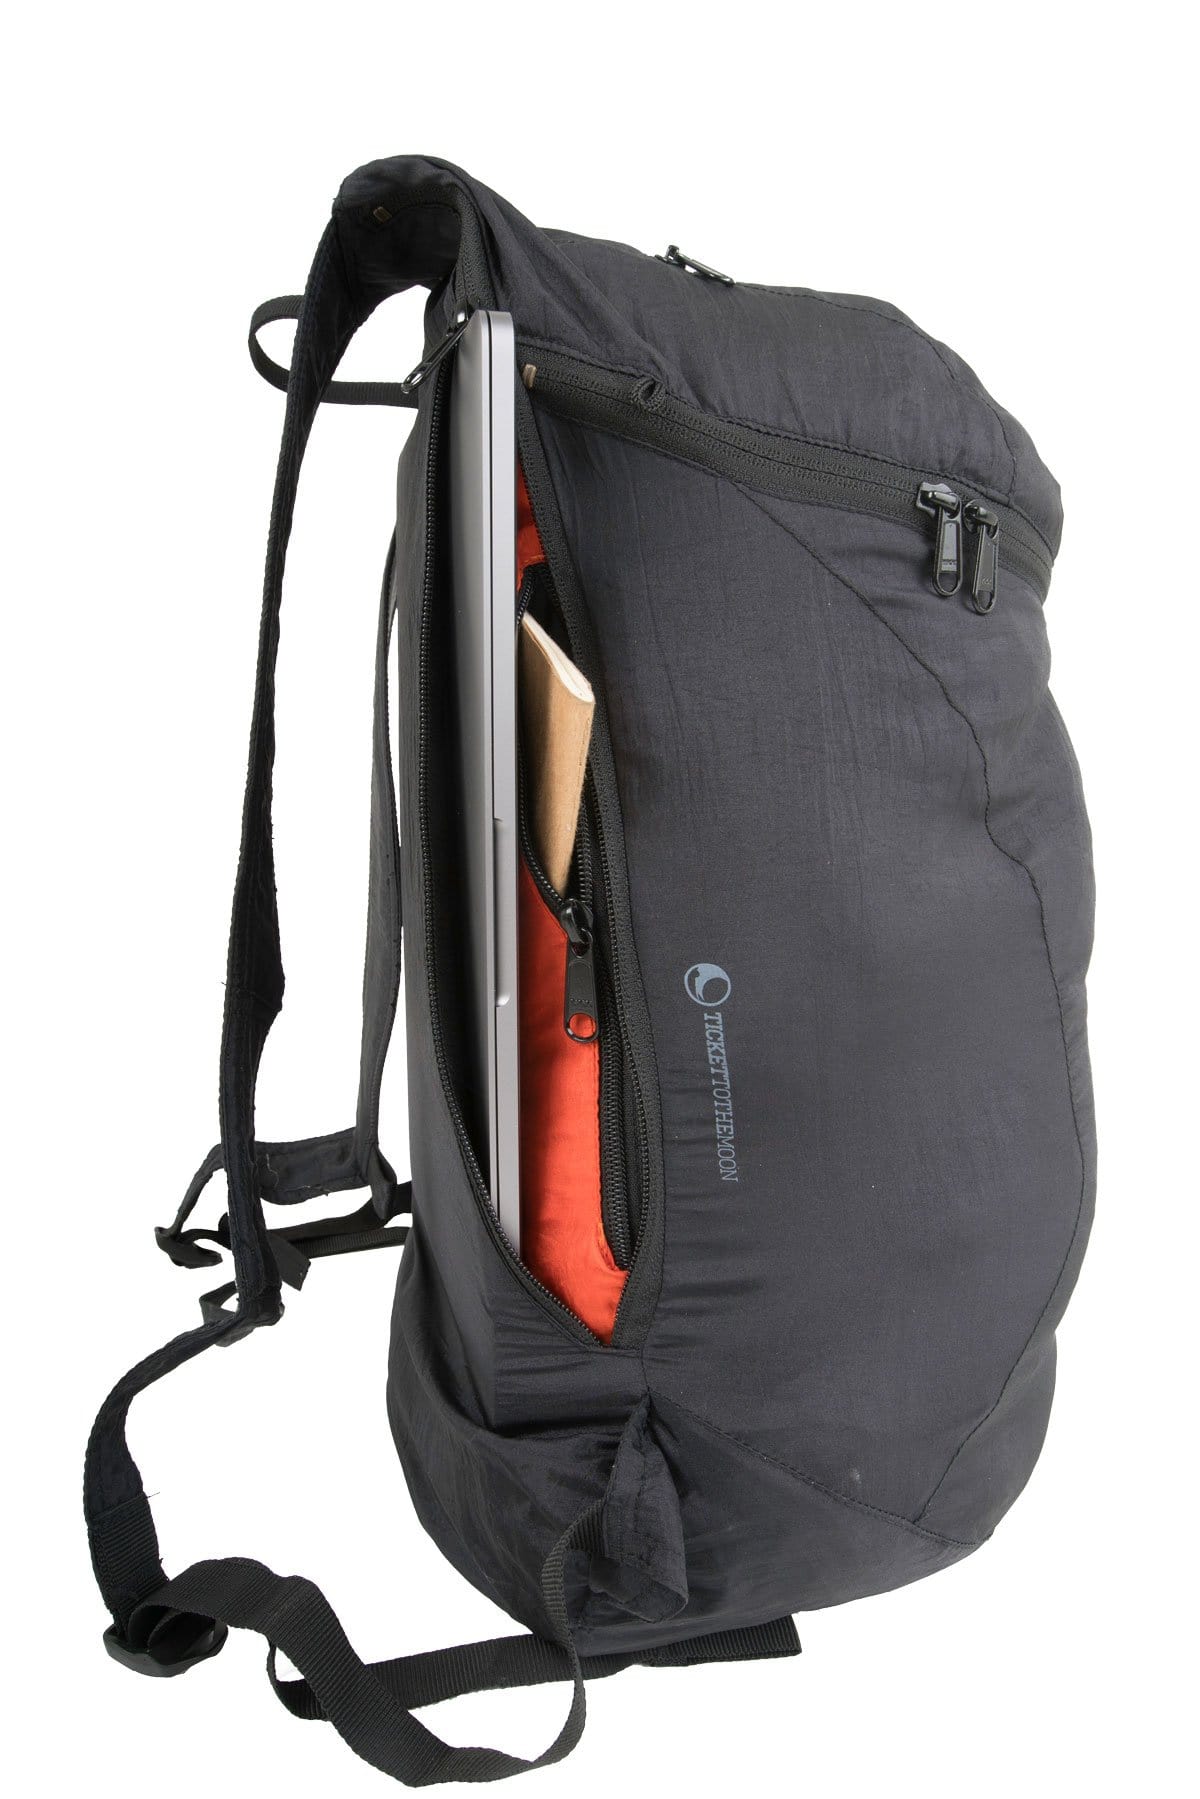 Ticket To The Moon Backpack Plus Sort 25L